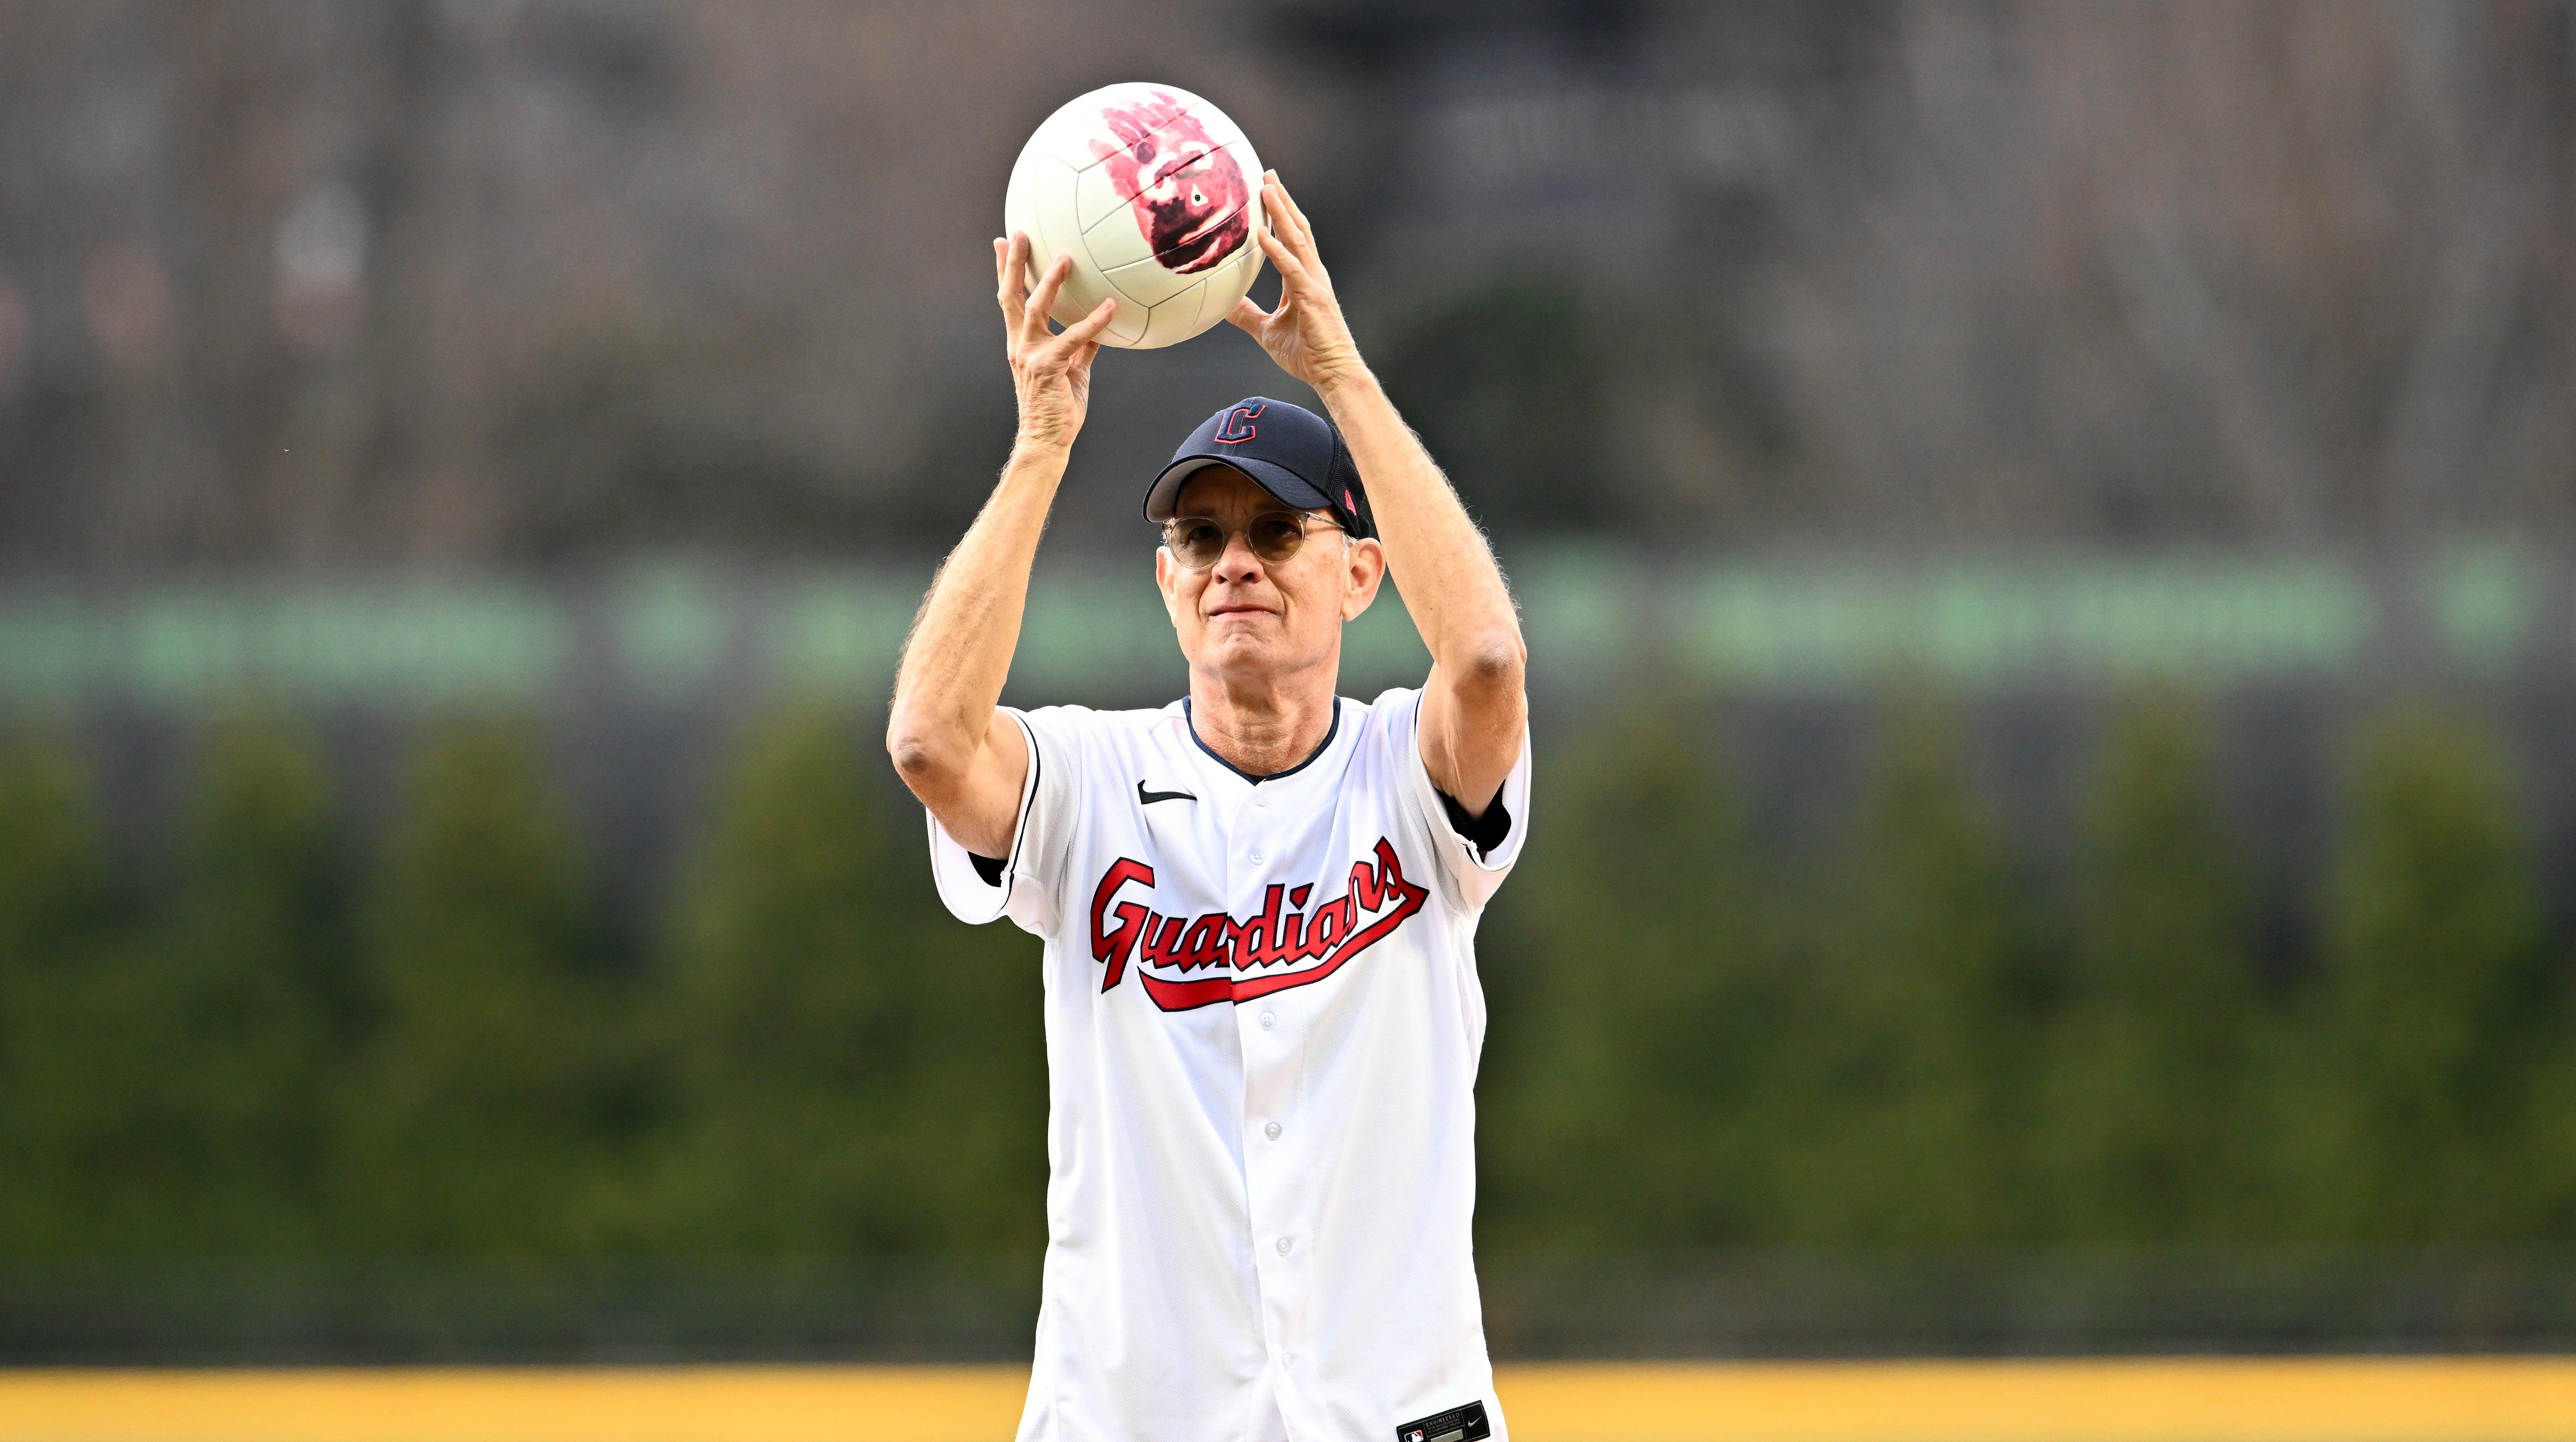 Cute Dad Tom Hanks did some Cute Dad Comedy at tonight’s Cleveland Guardians game